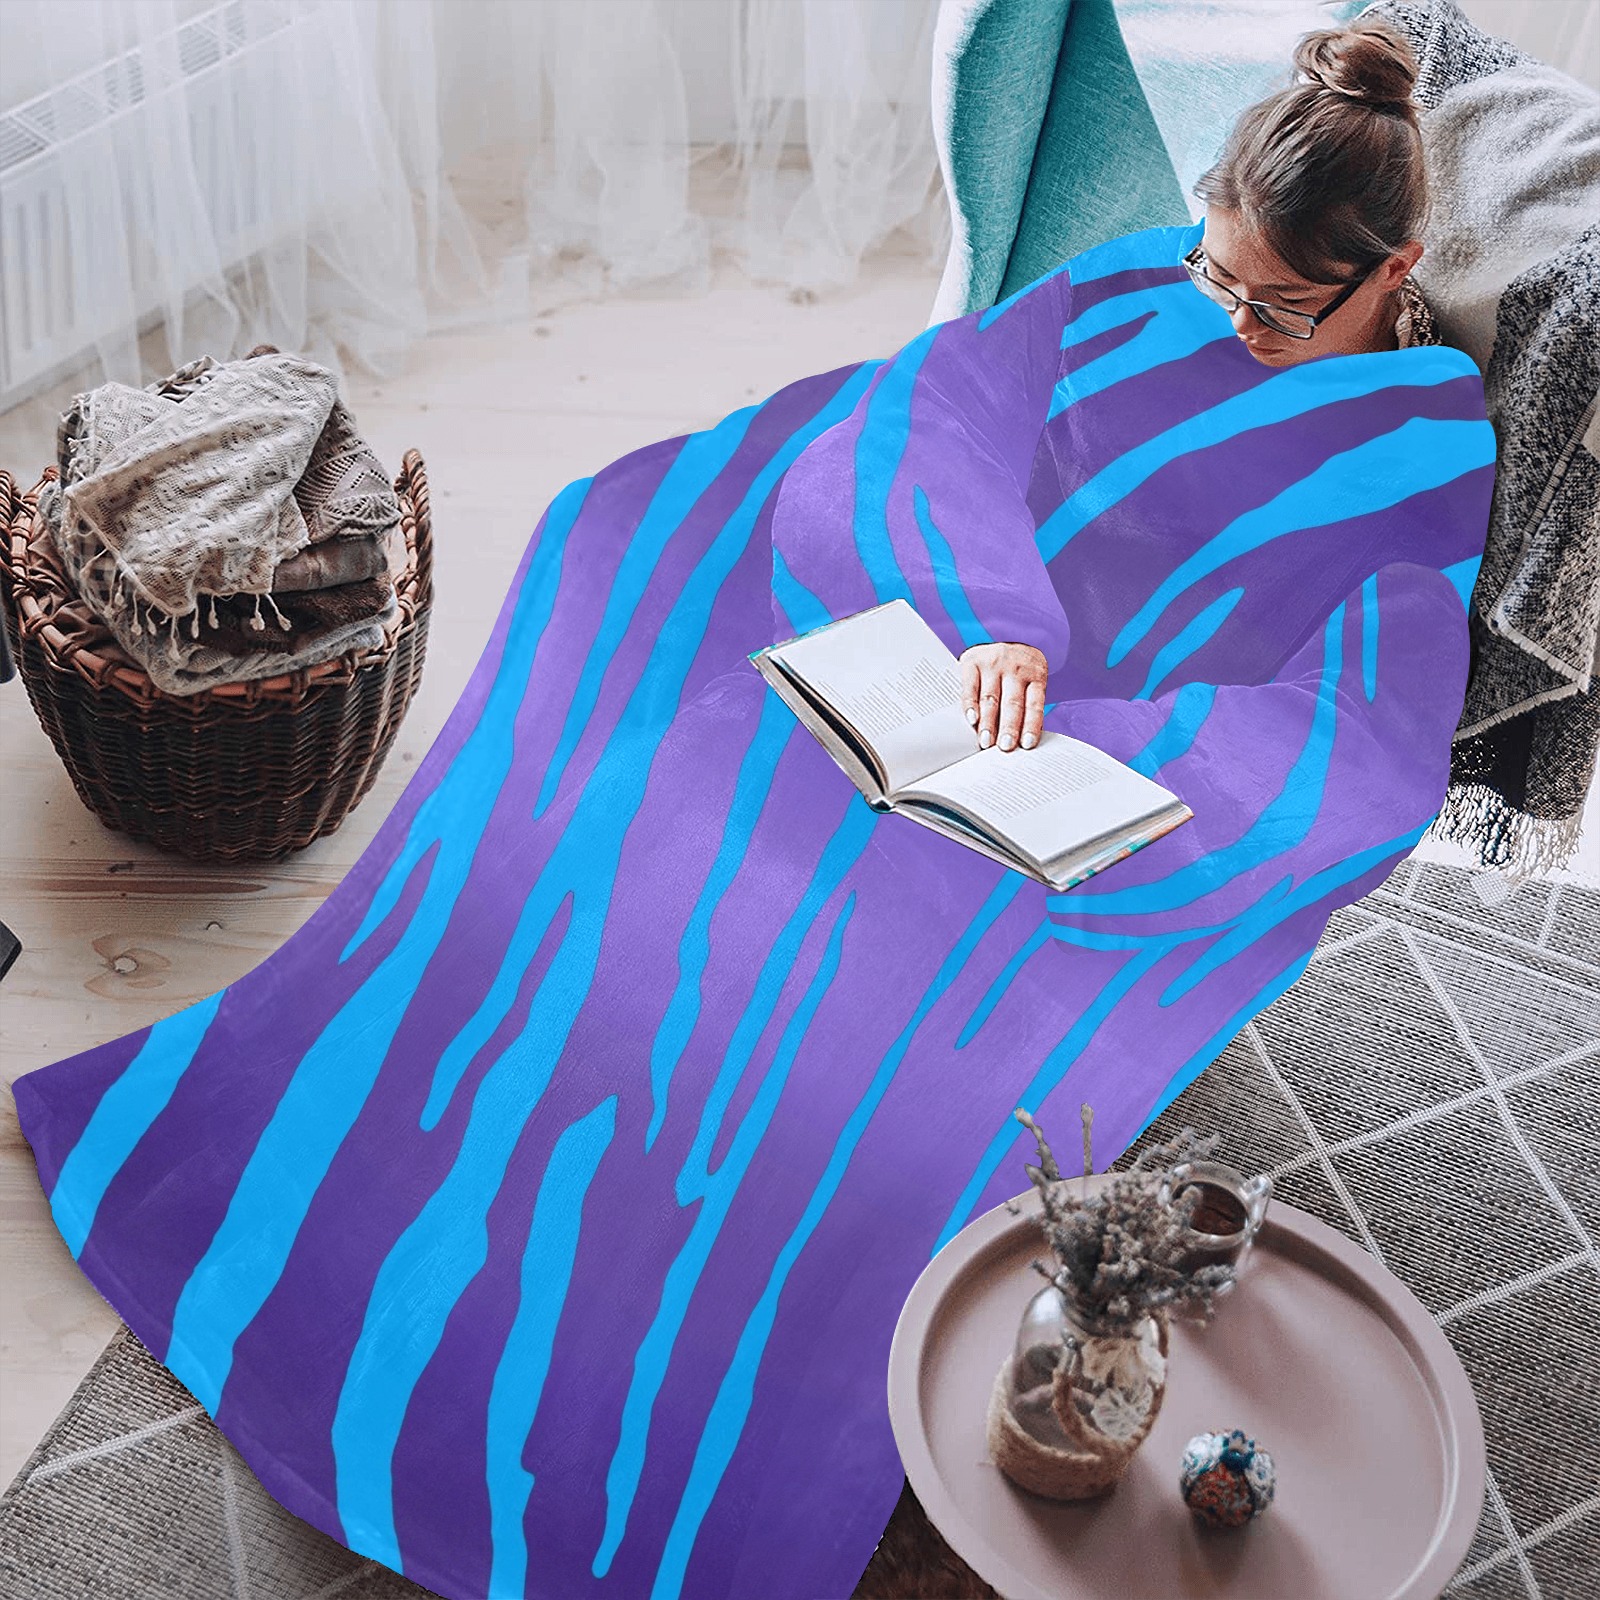 Metallic Tiger Stripes Purple Blue Blanket Robe with Sleeves for Adults